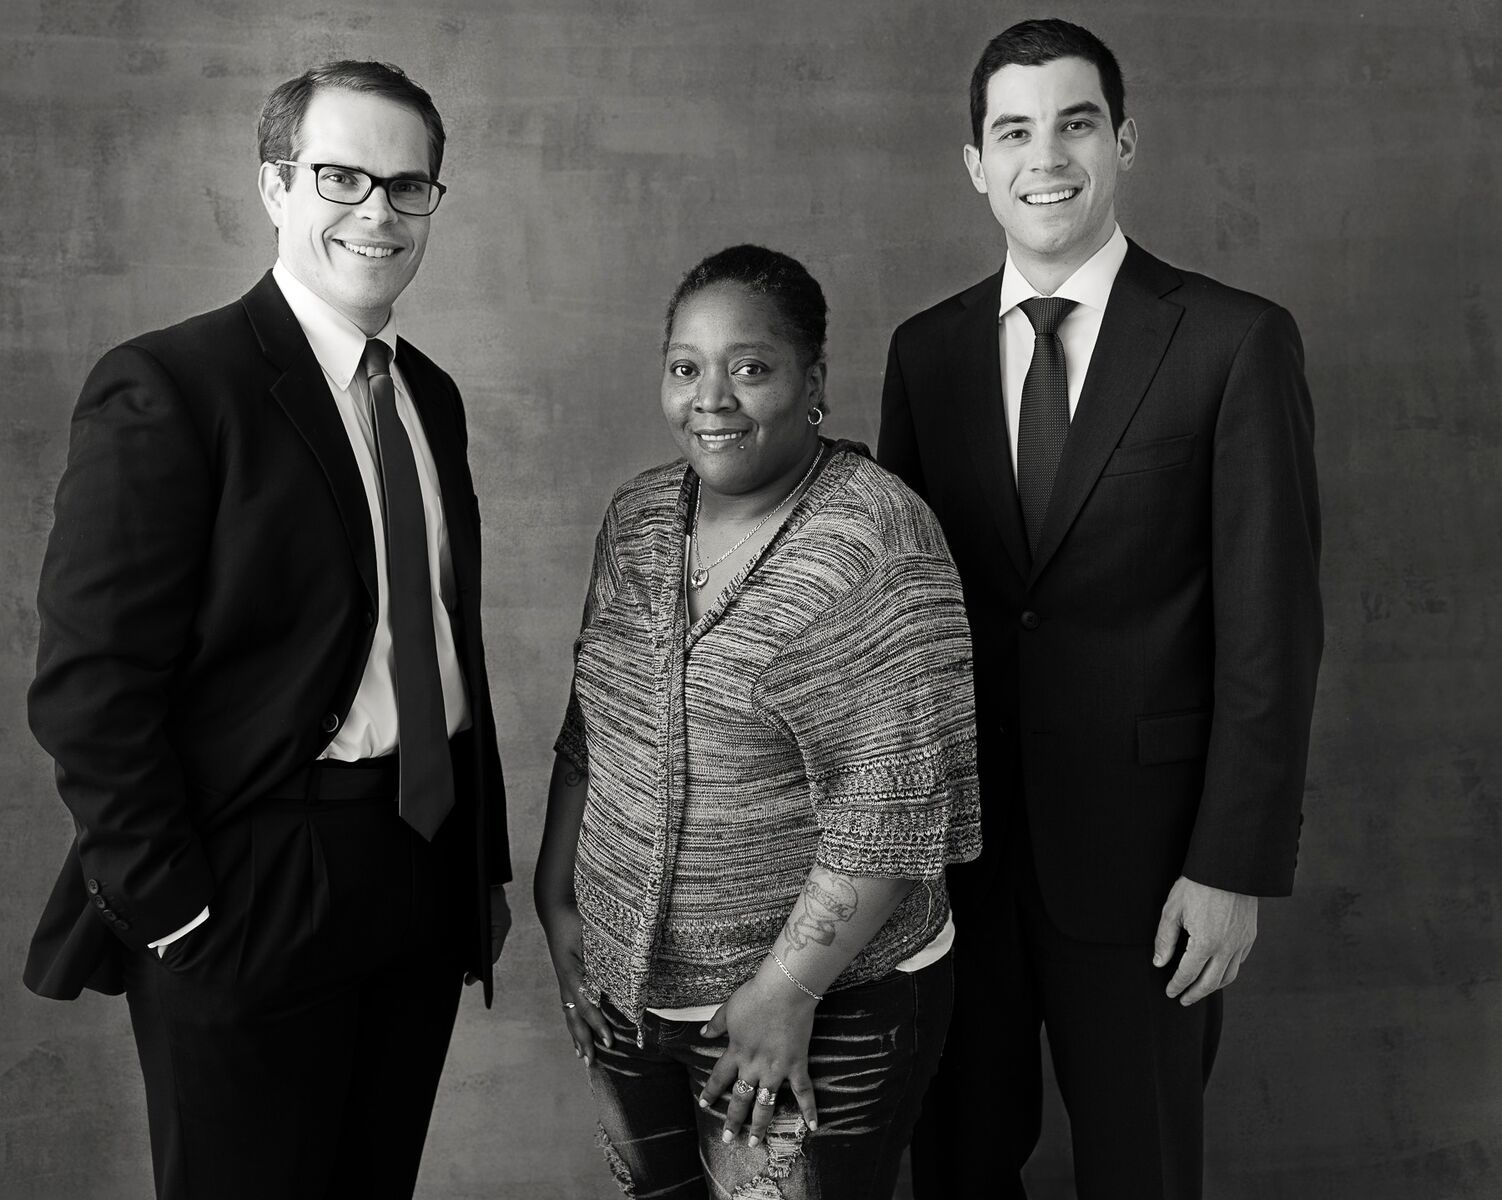  Crystal Taylor with Jonathan Porter (left) and Elliot Weingarten (right) of Simpson Thacher & Bartlett LLP